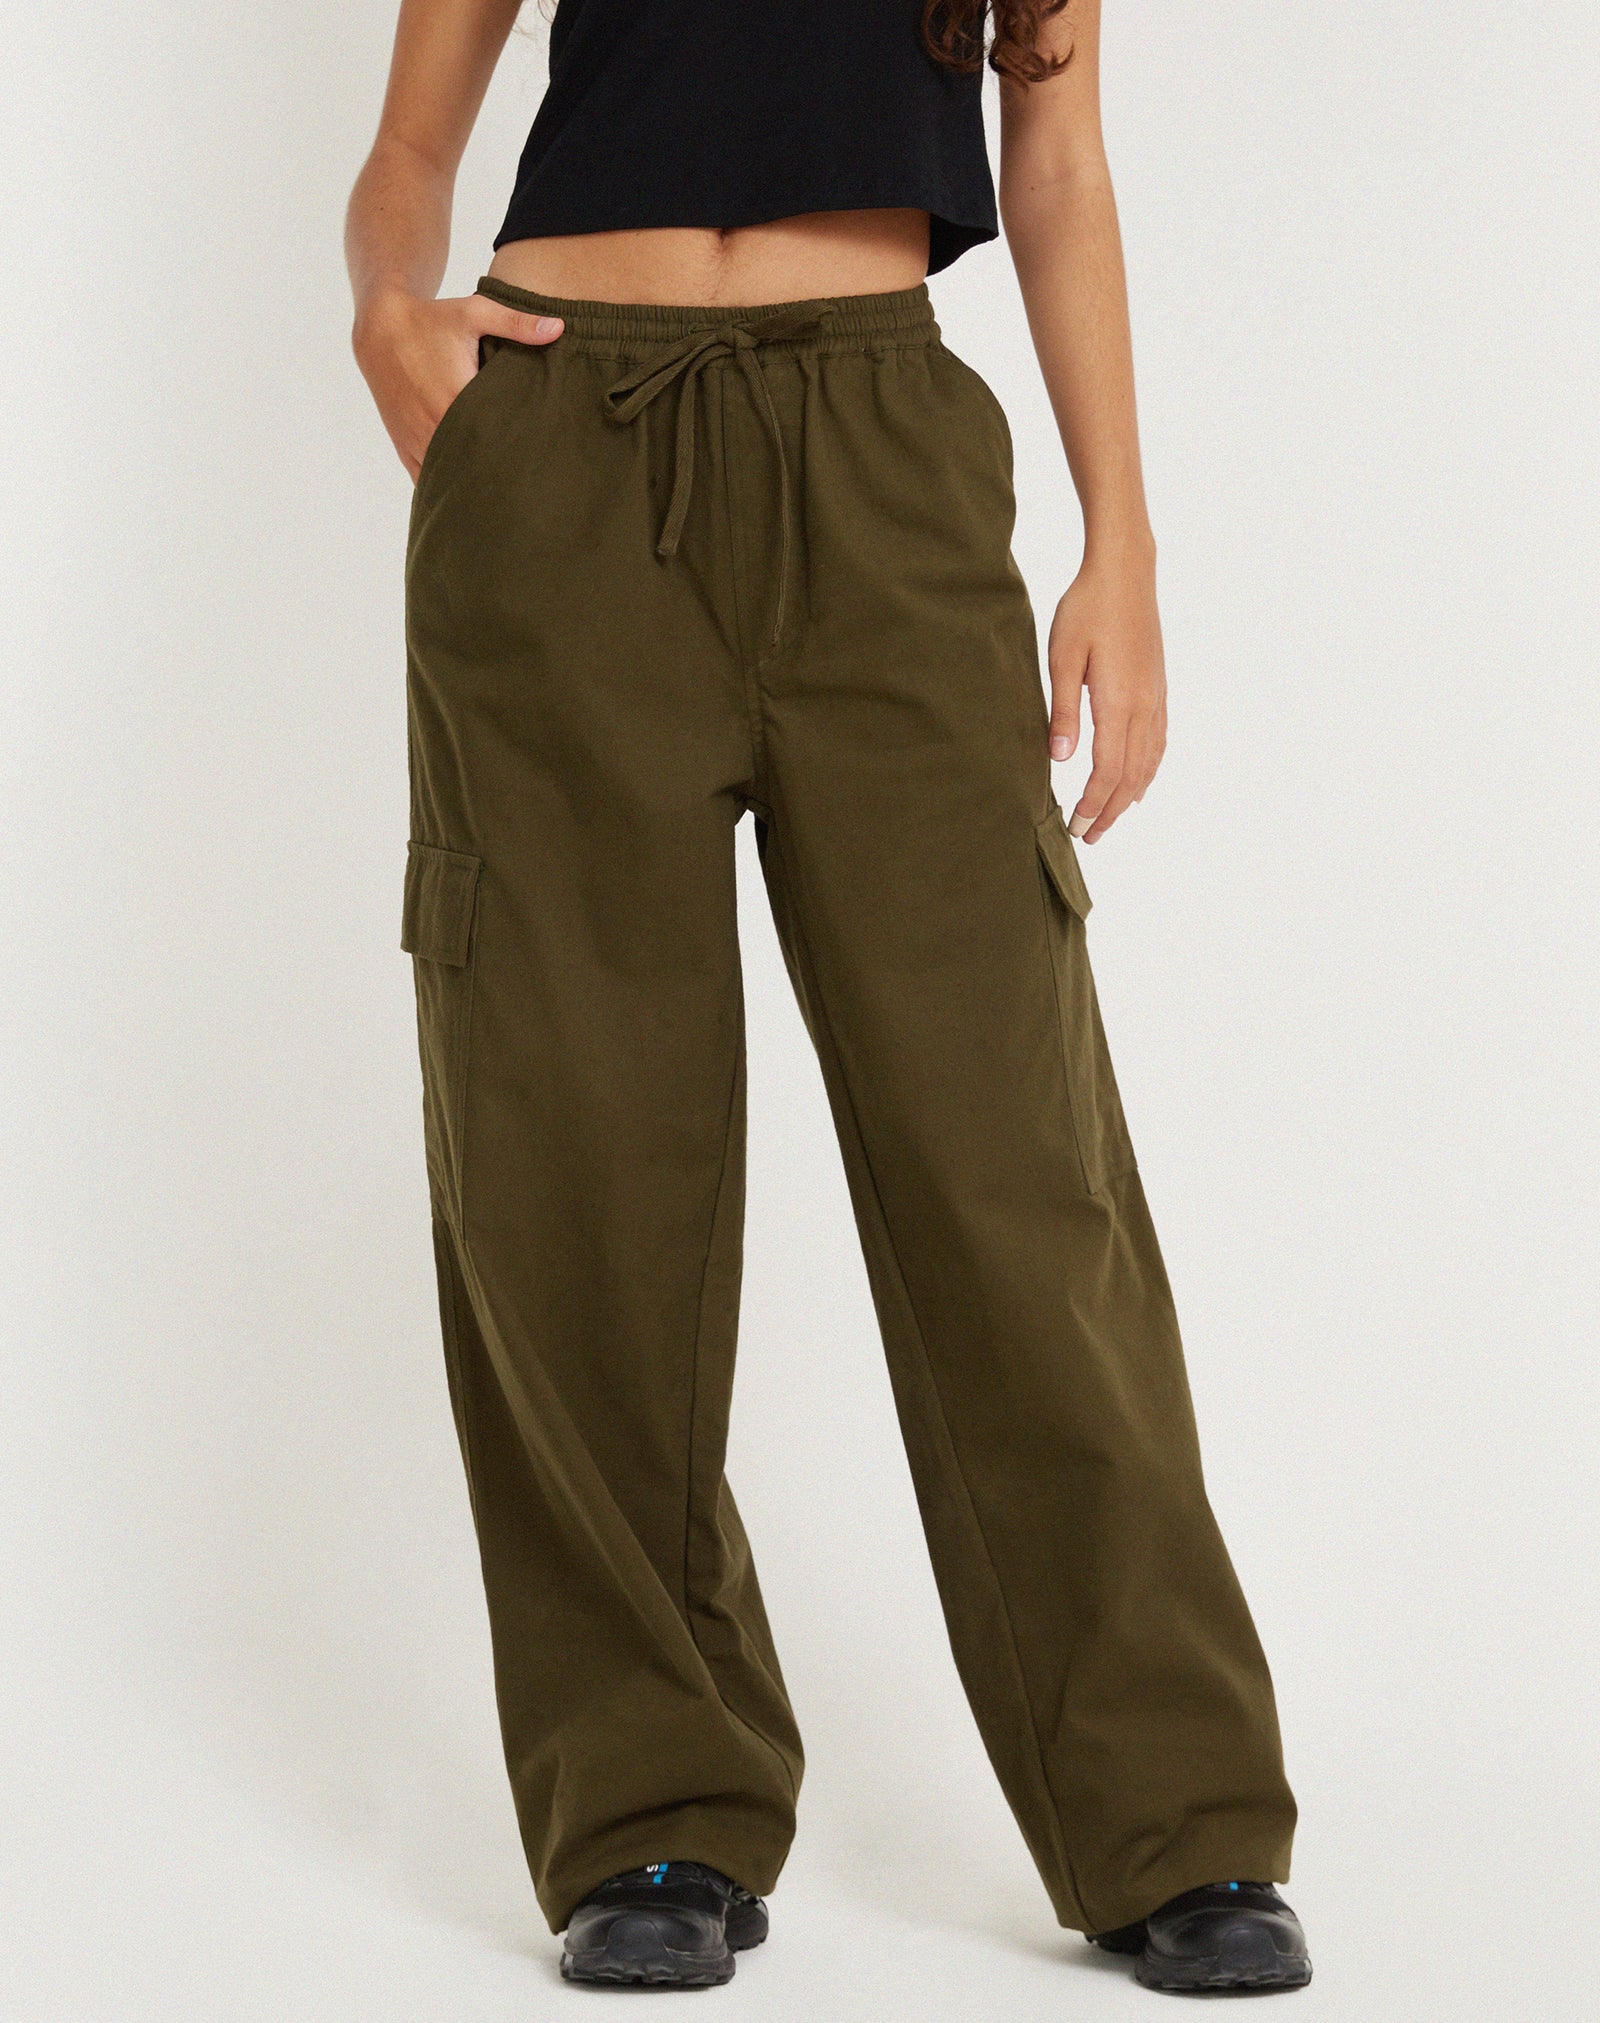 Gather paperboy pants army green with Hablon weave  wearherman